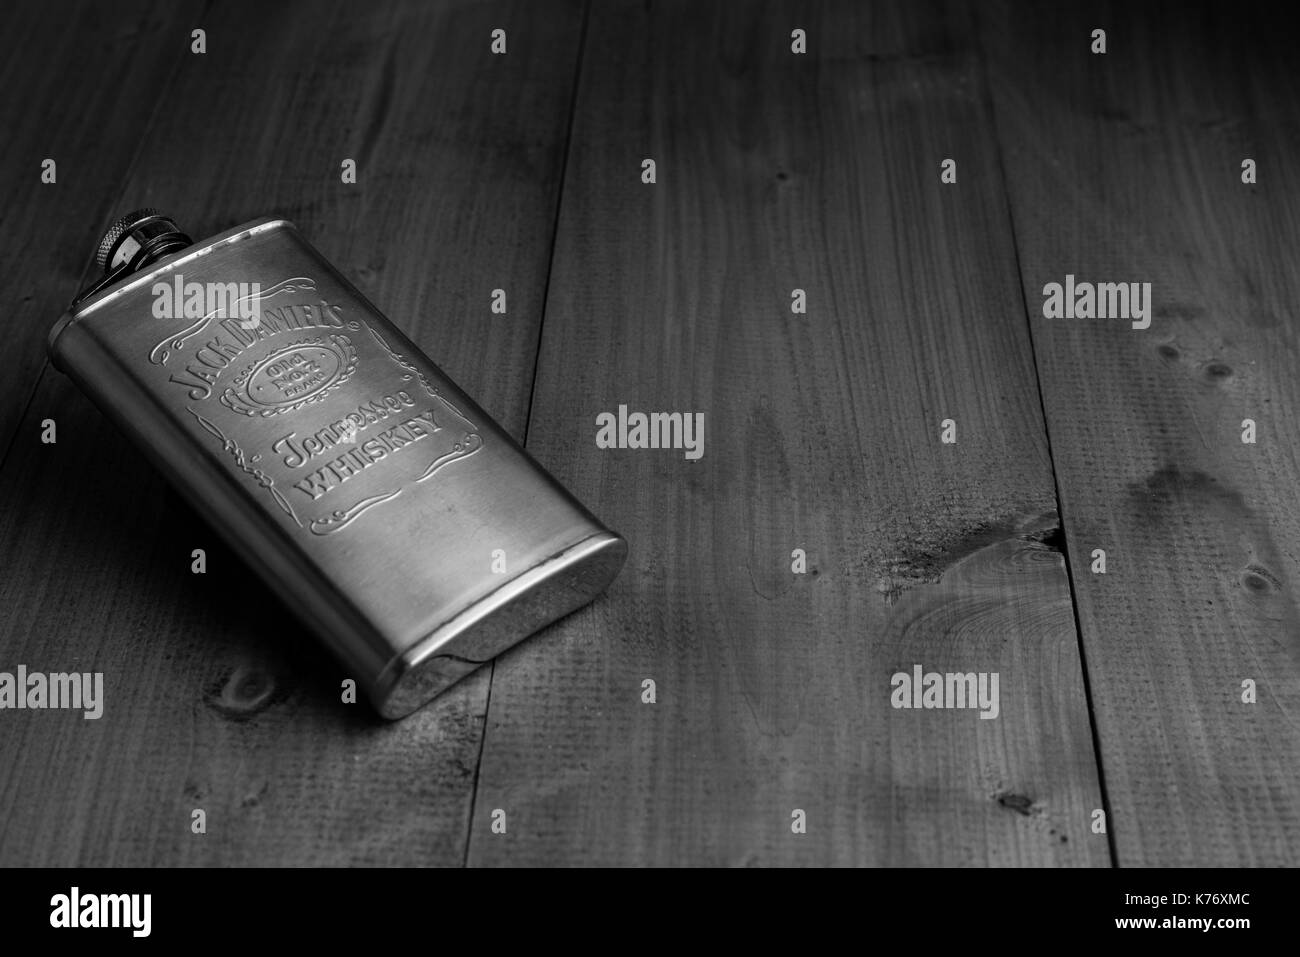 Jack Daniels Hip Flask on wooden surface. Stock Photo